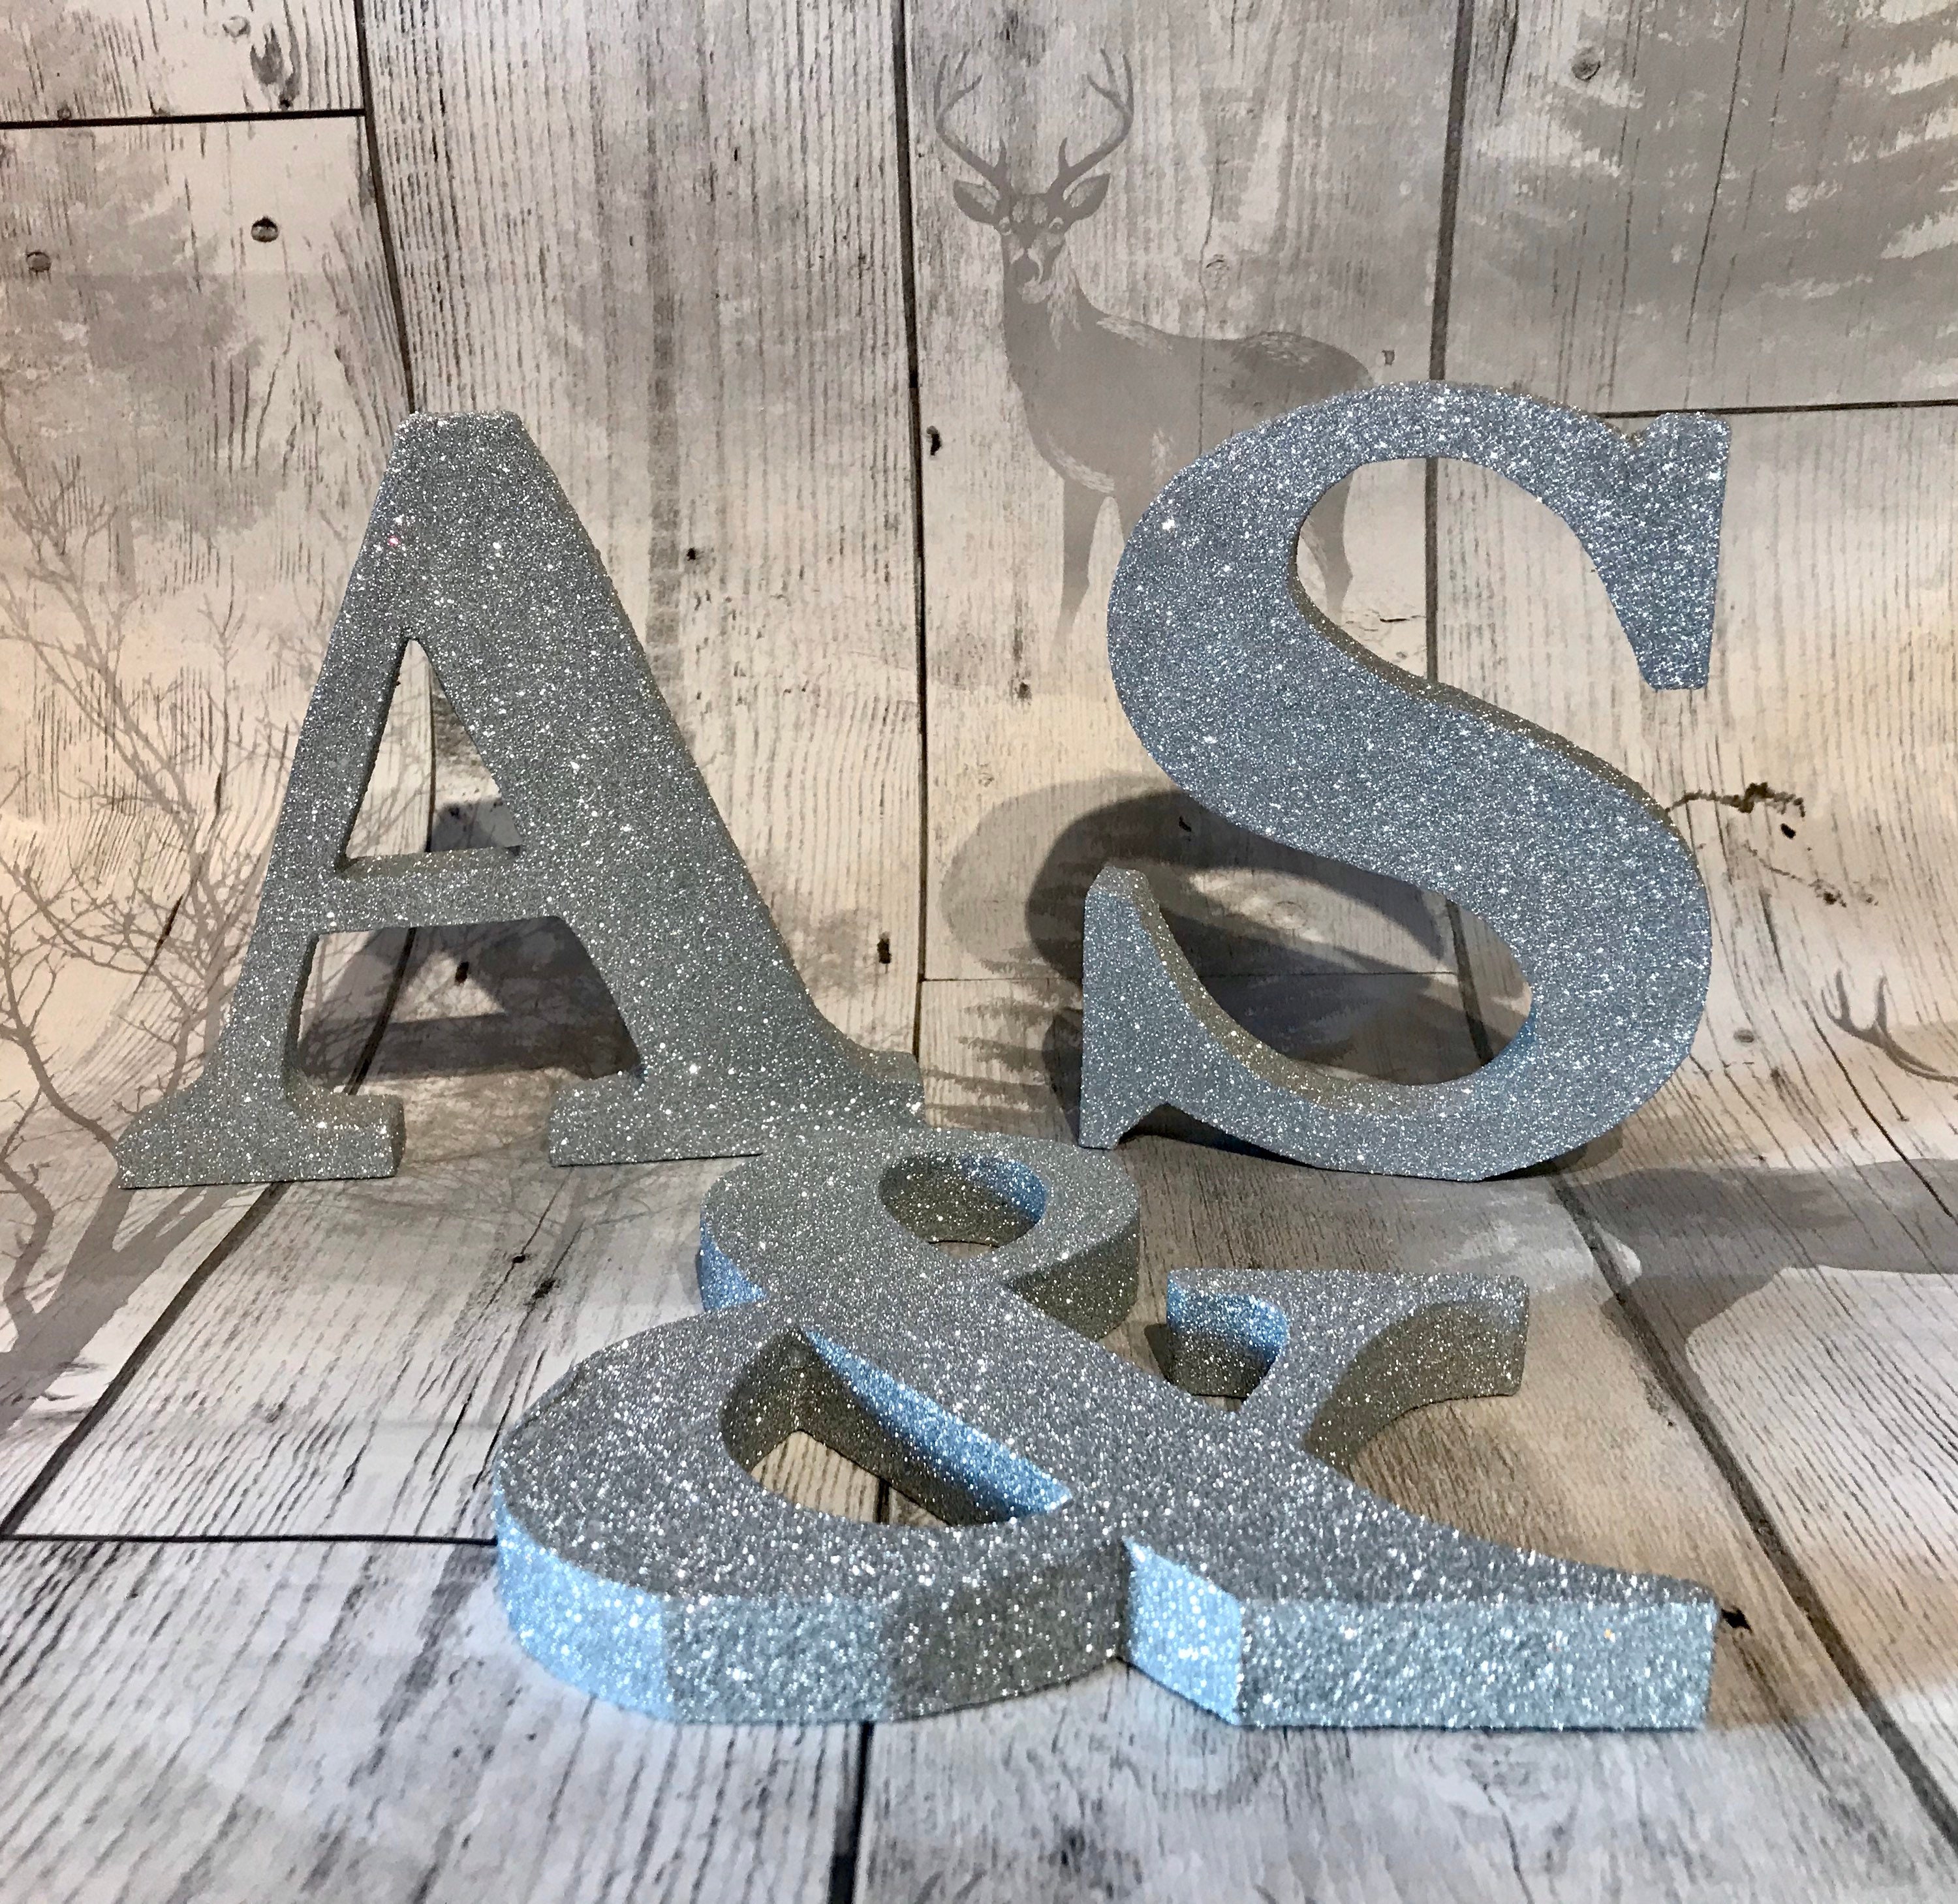 Gold Concrete Letters Hand Painted Gold 3d Letters Perfect Shelf Decor  letters Full Gold -  Israel